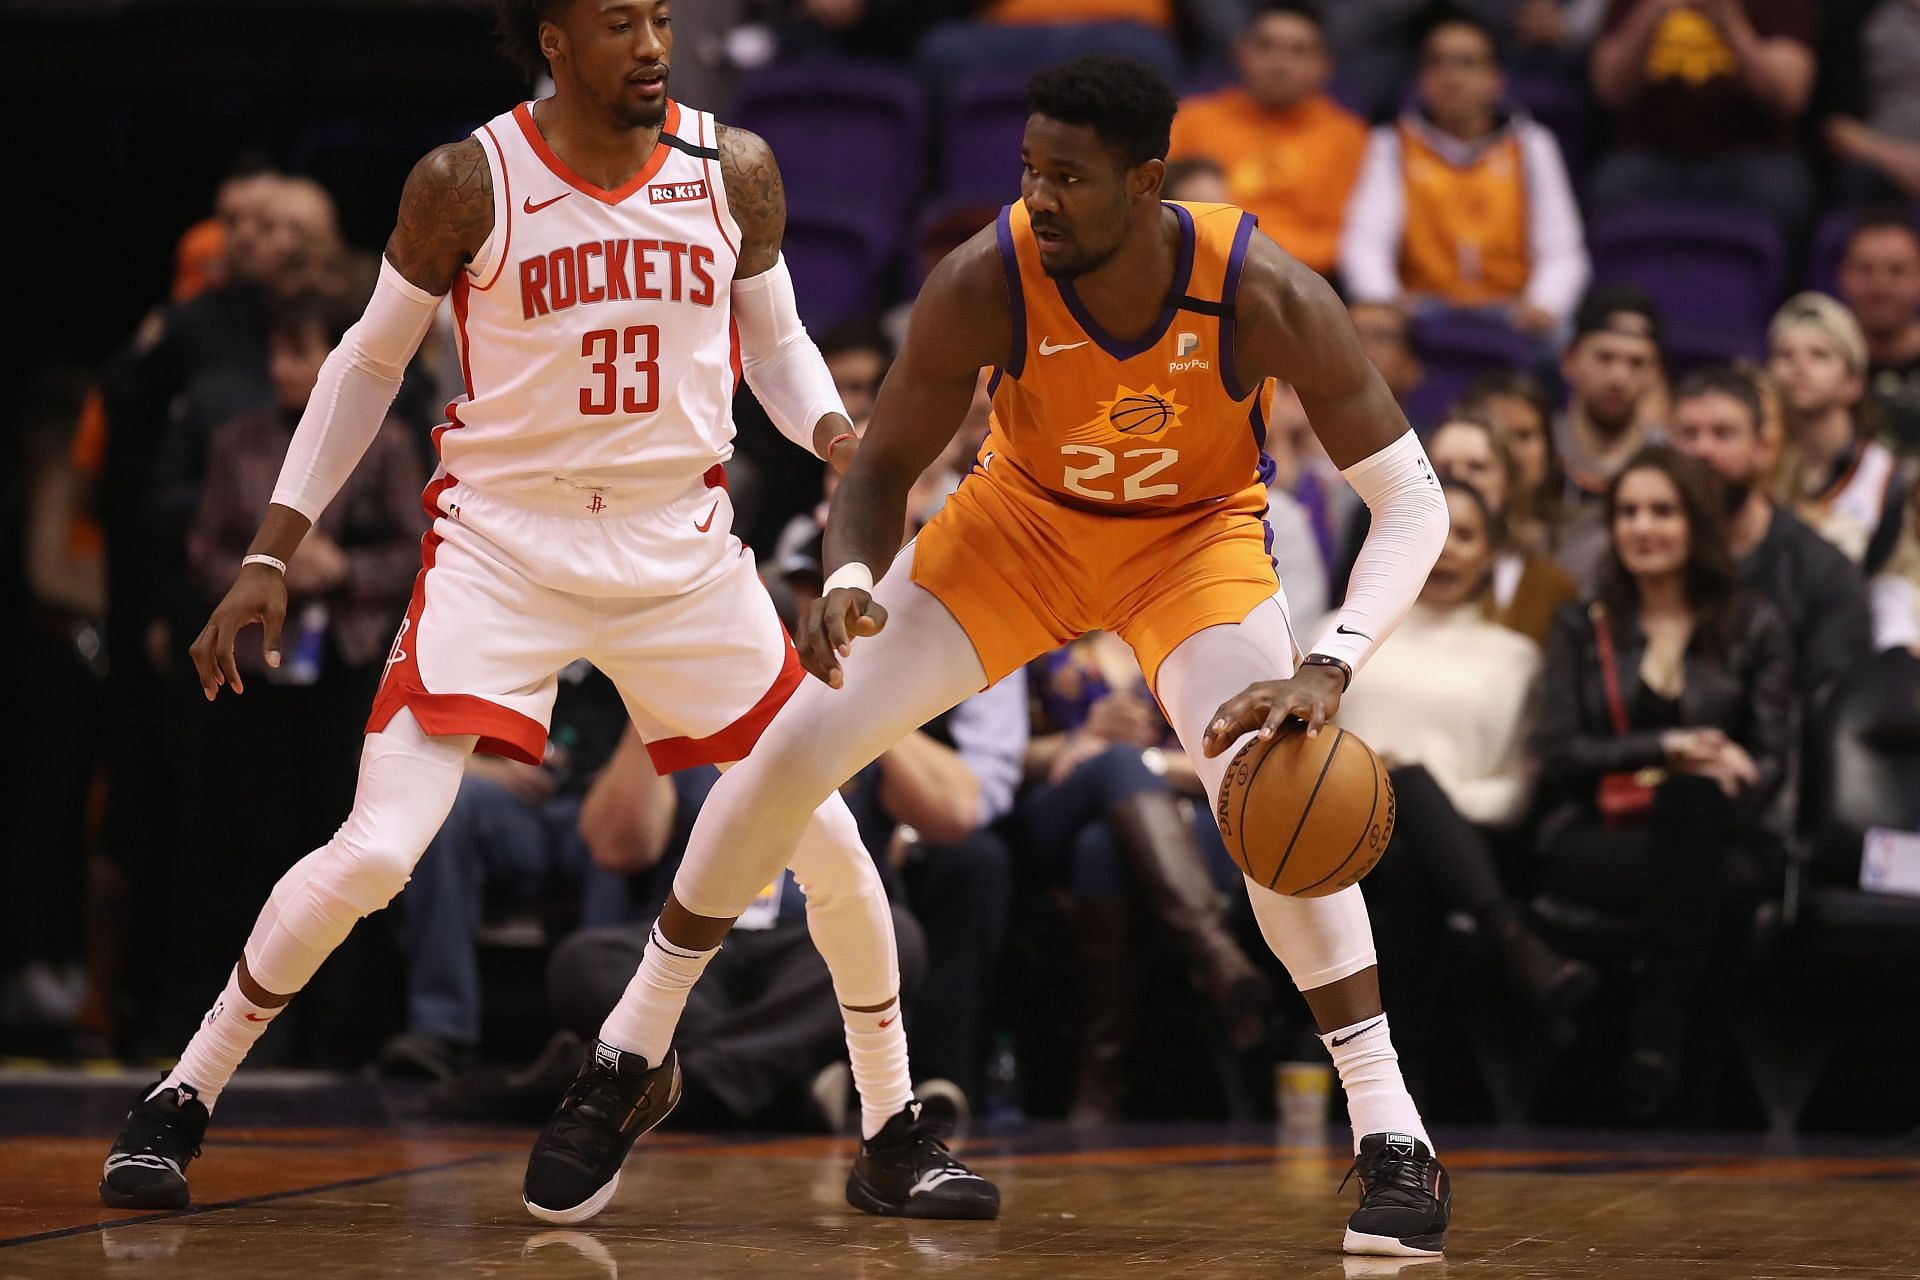 The Phoenix Suns will host the Houston Rockets for the first time this season.